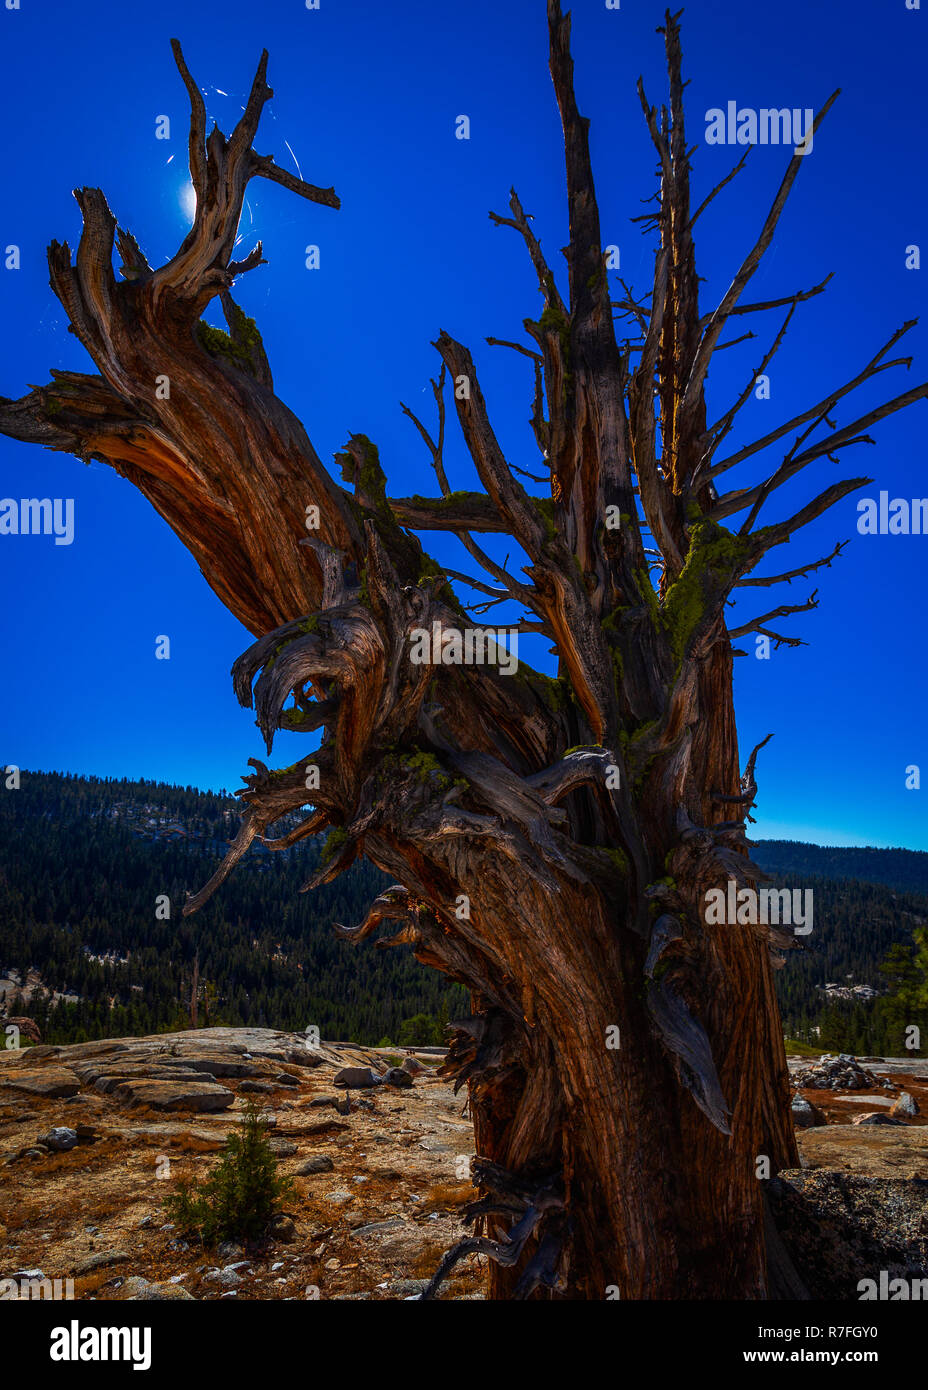 Craggy Old Tree growing out of the rocks Banque D'Images